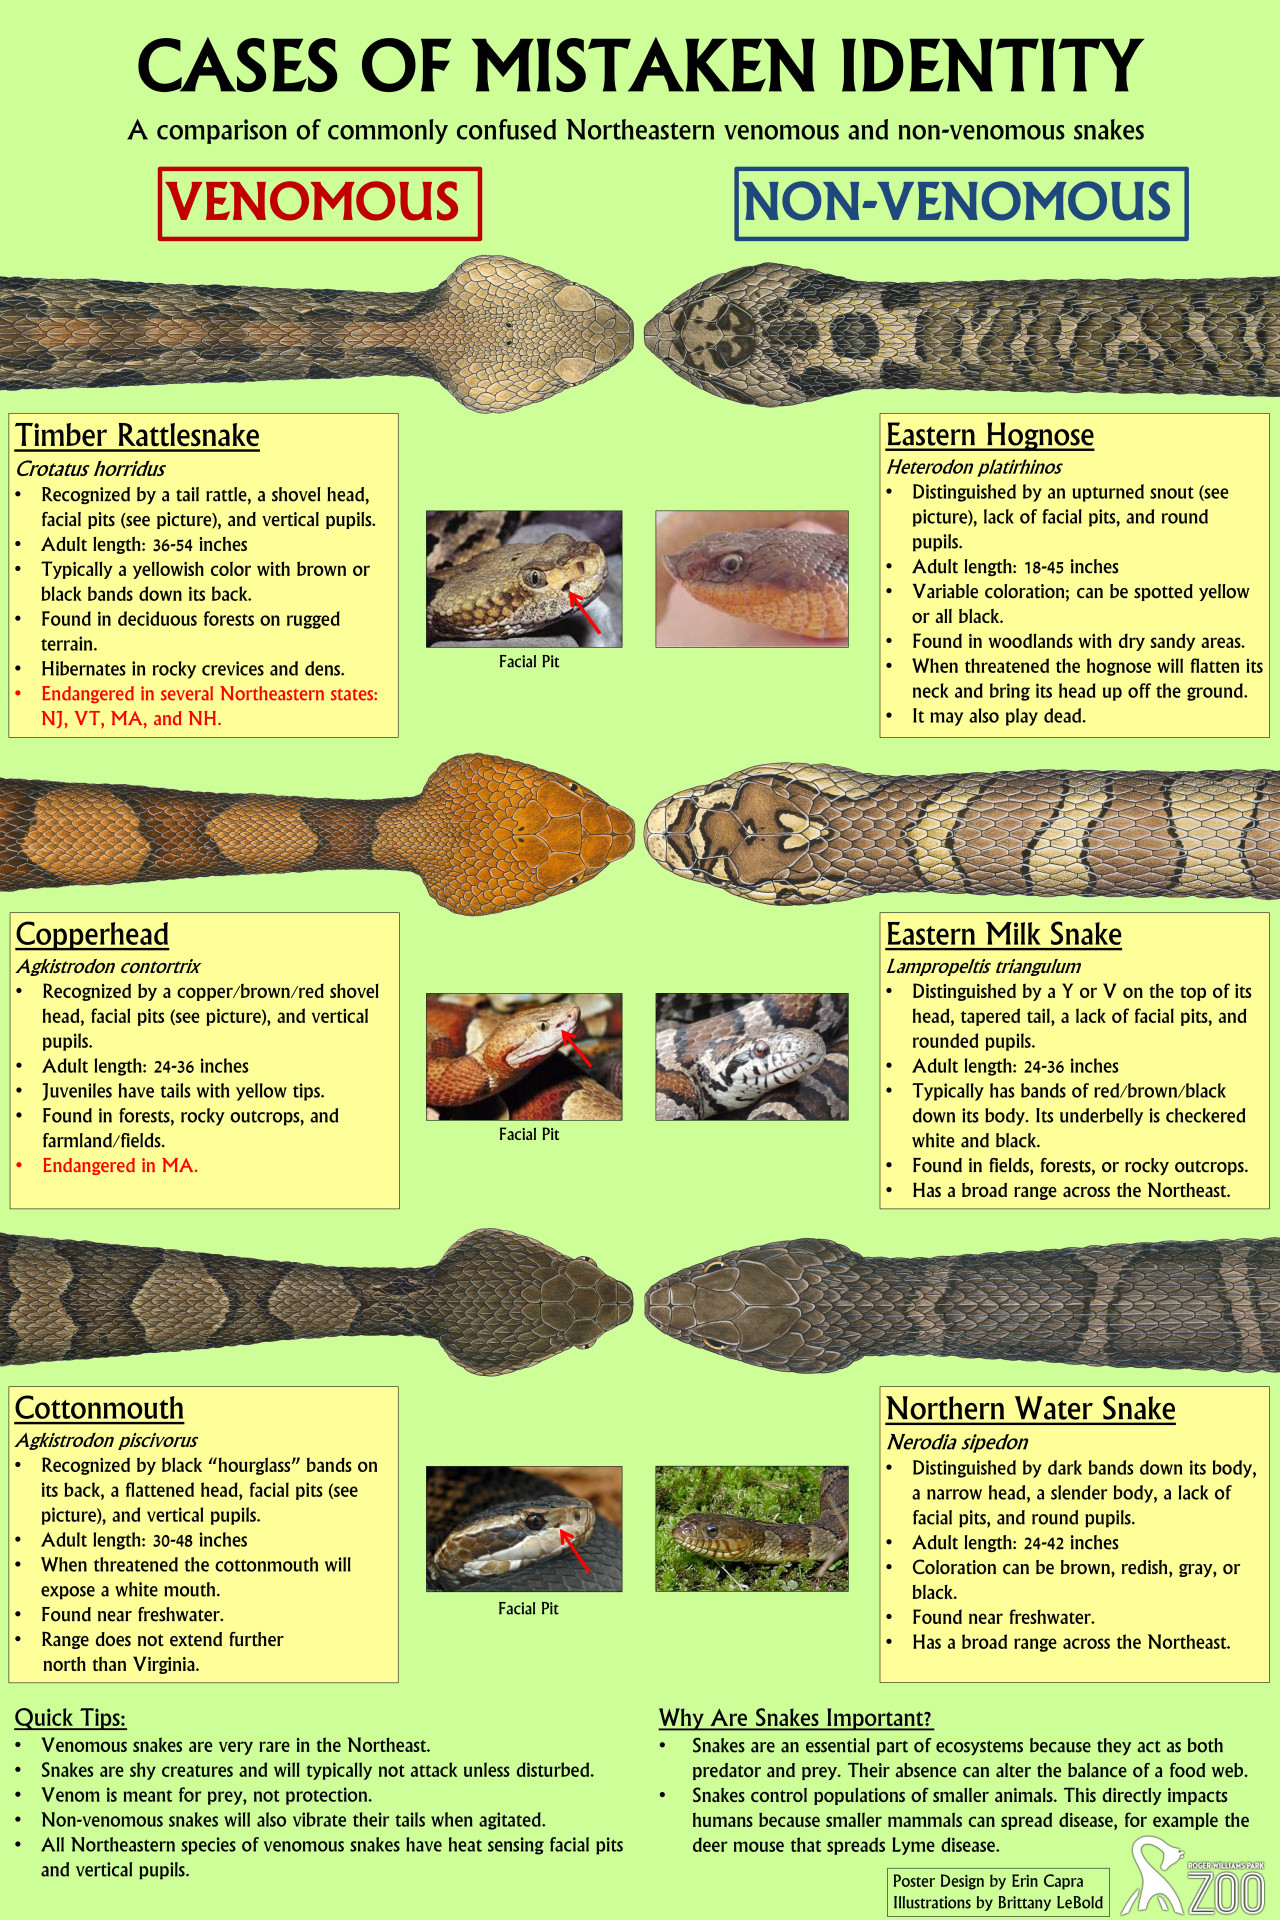 leboldillustrations:
“Cases of Mistaken Identity
I’m so excited to share with you the final version of the snake poster I provided illustrations for. The Roger Williams Zoo is working to help educate the public about these common mistaken identities...